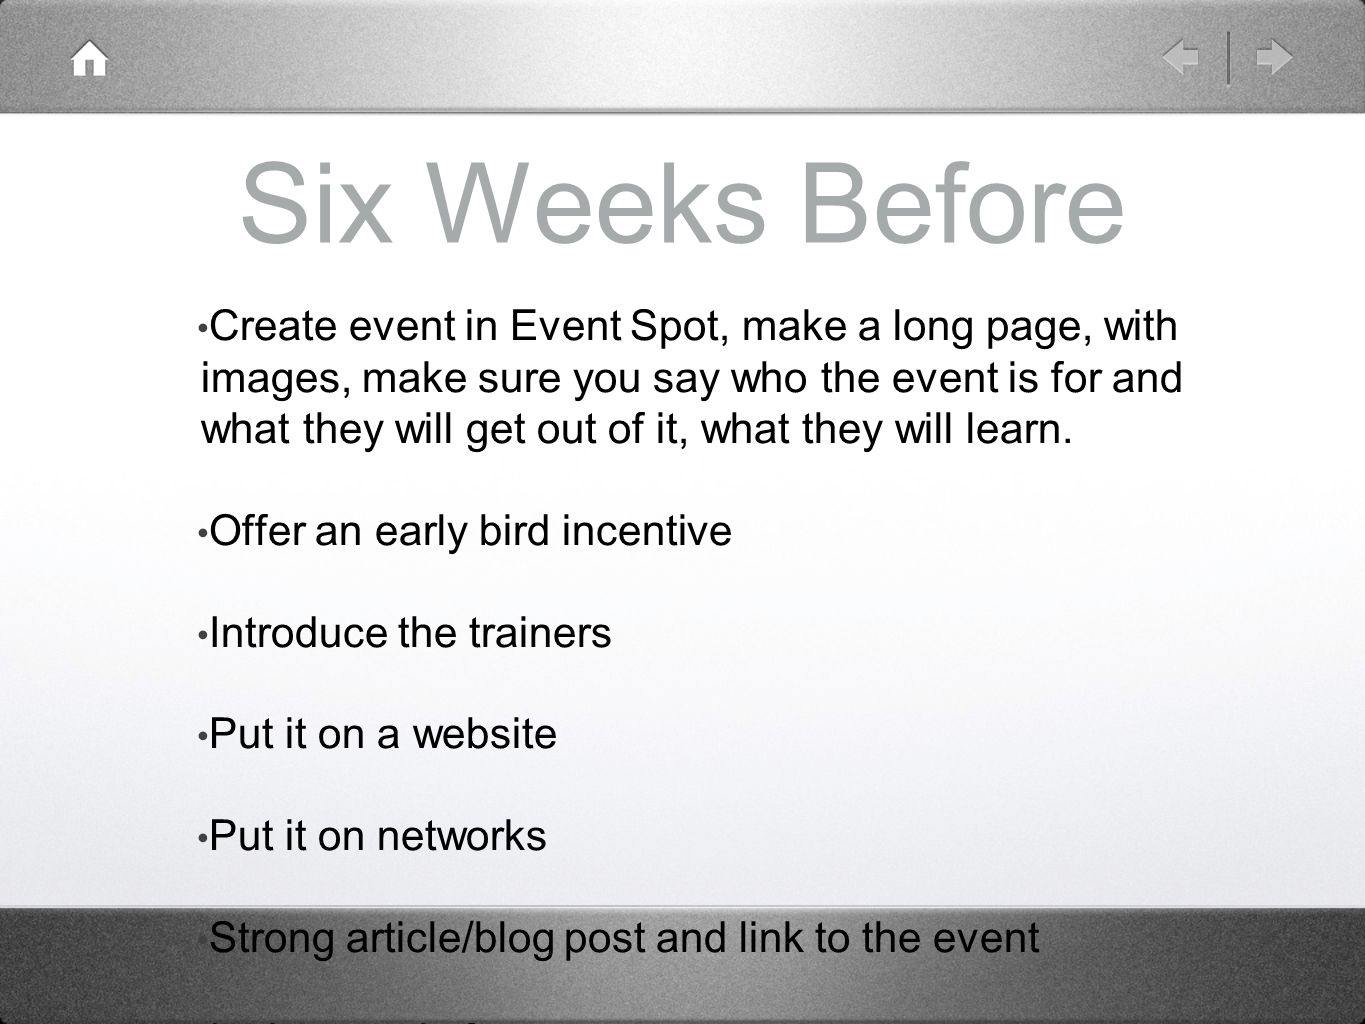 Six Weeks Before Create event in Event Spot, make a long page, with images, make sure you say who the event is for and what they will get out of it, what they will learn.